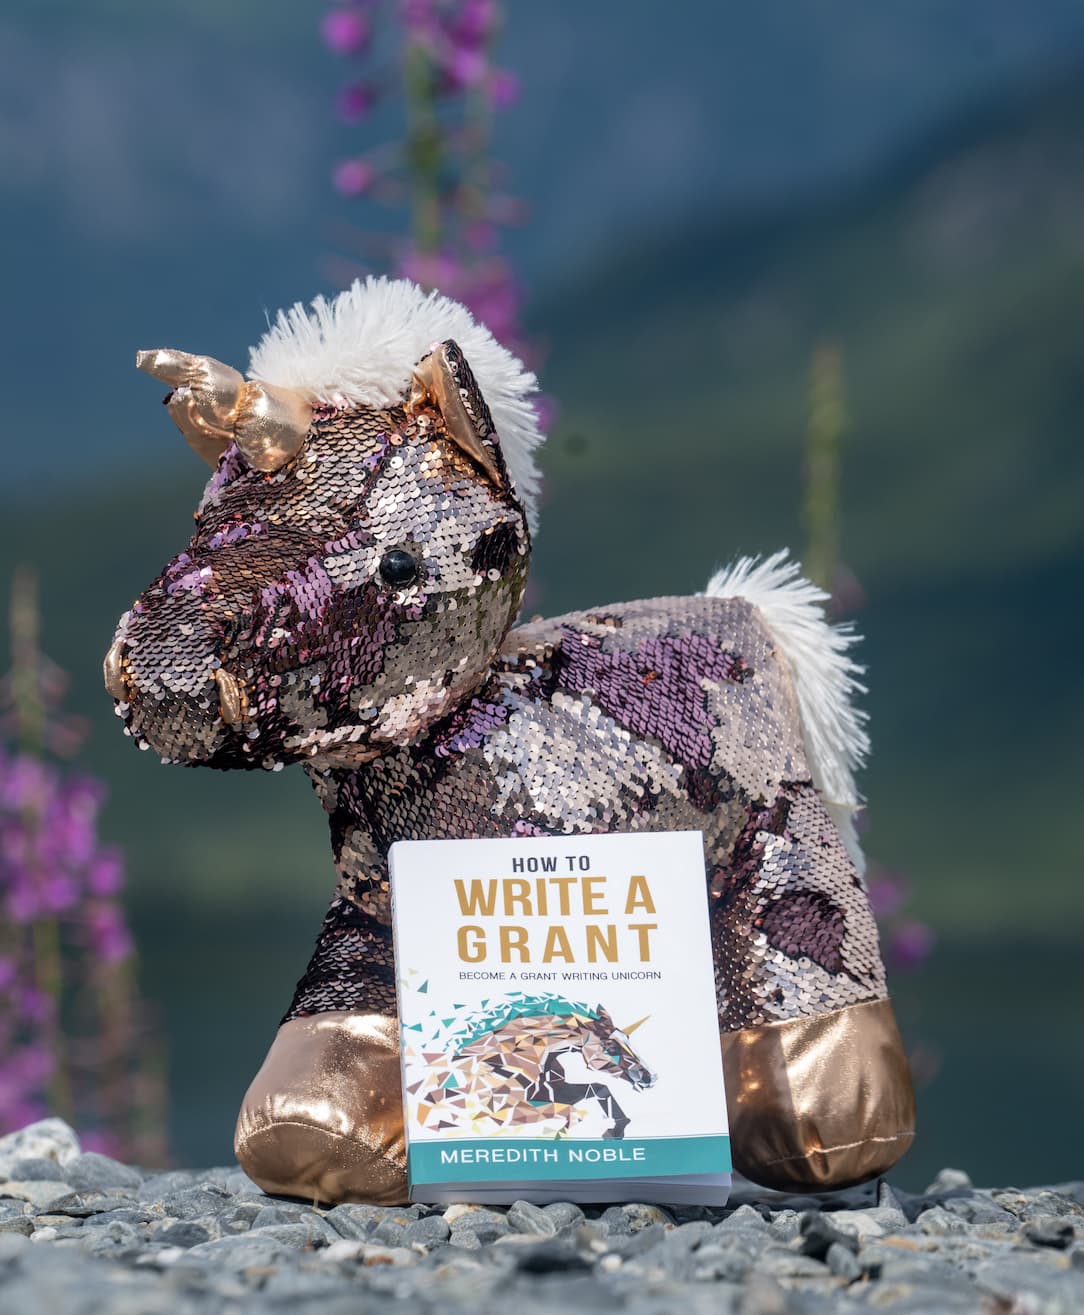 Sparkly grant writing unicorn with book